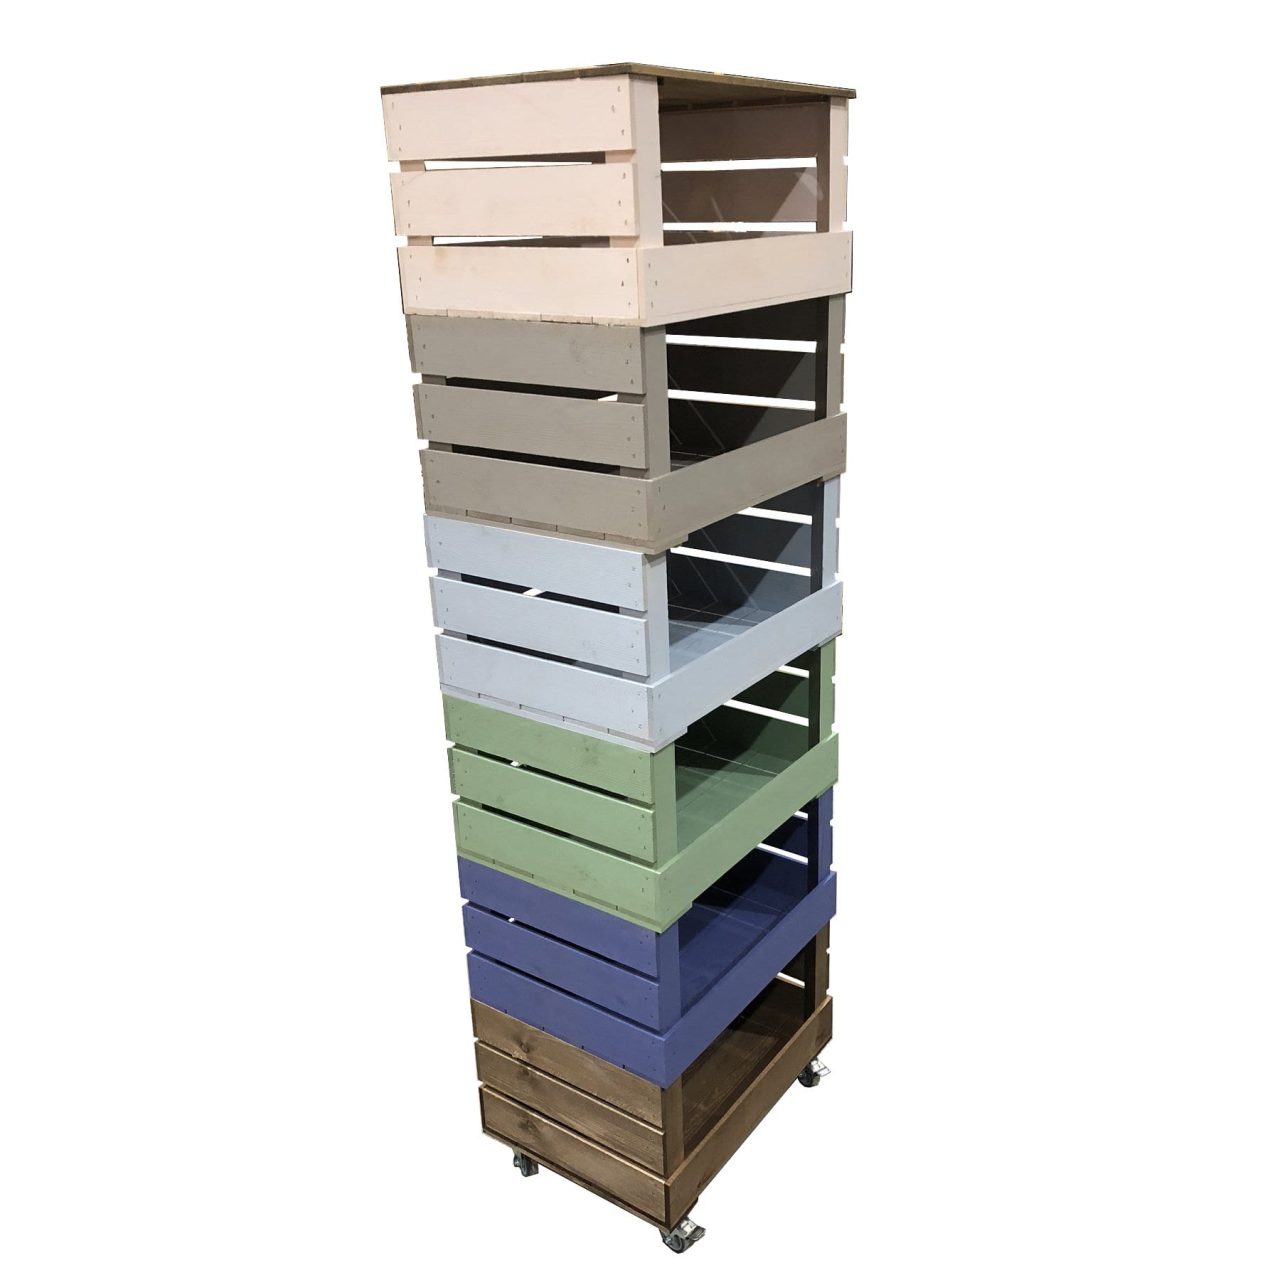 6 Crate Painted Mobile Tower Storage, Tower Shelving System